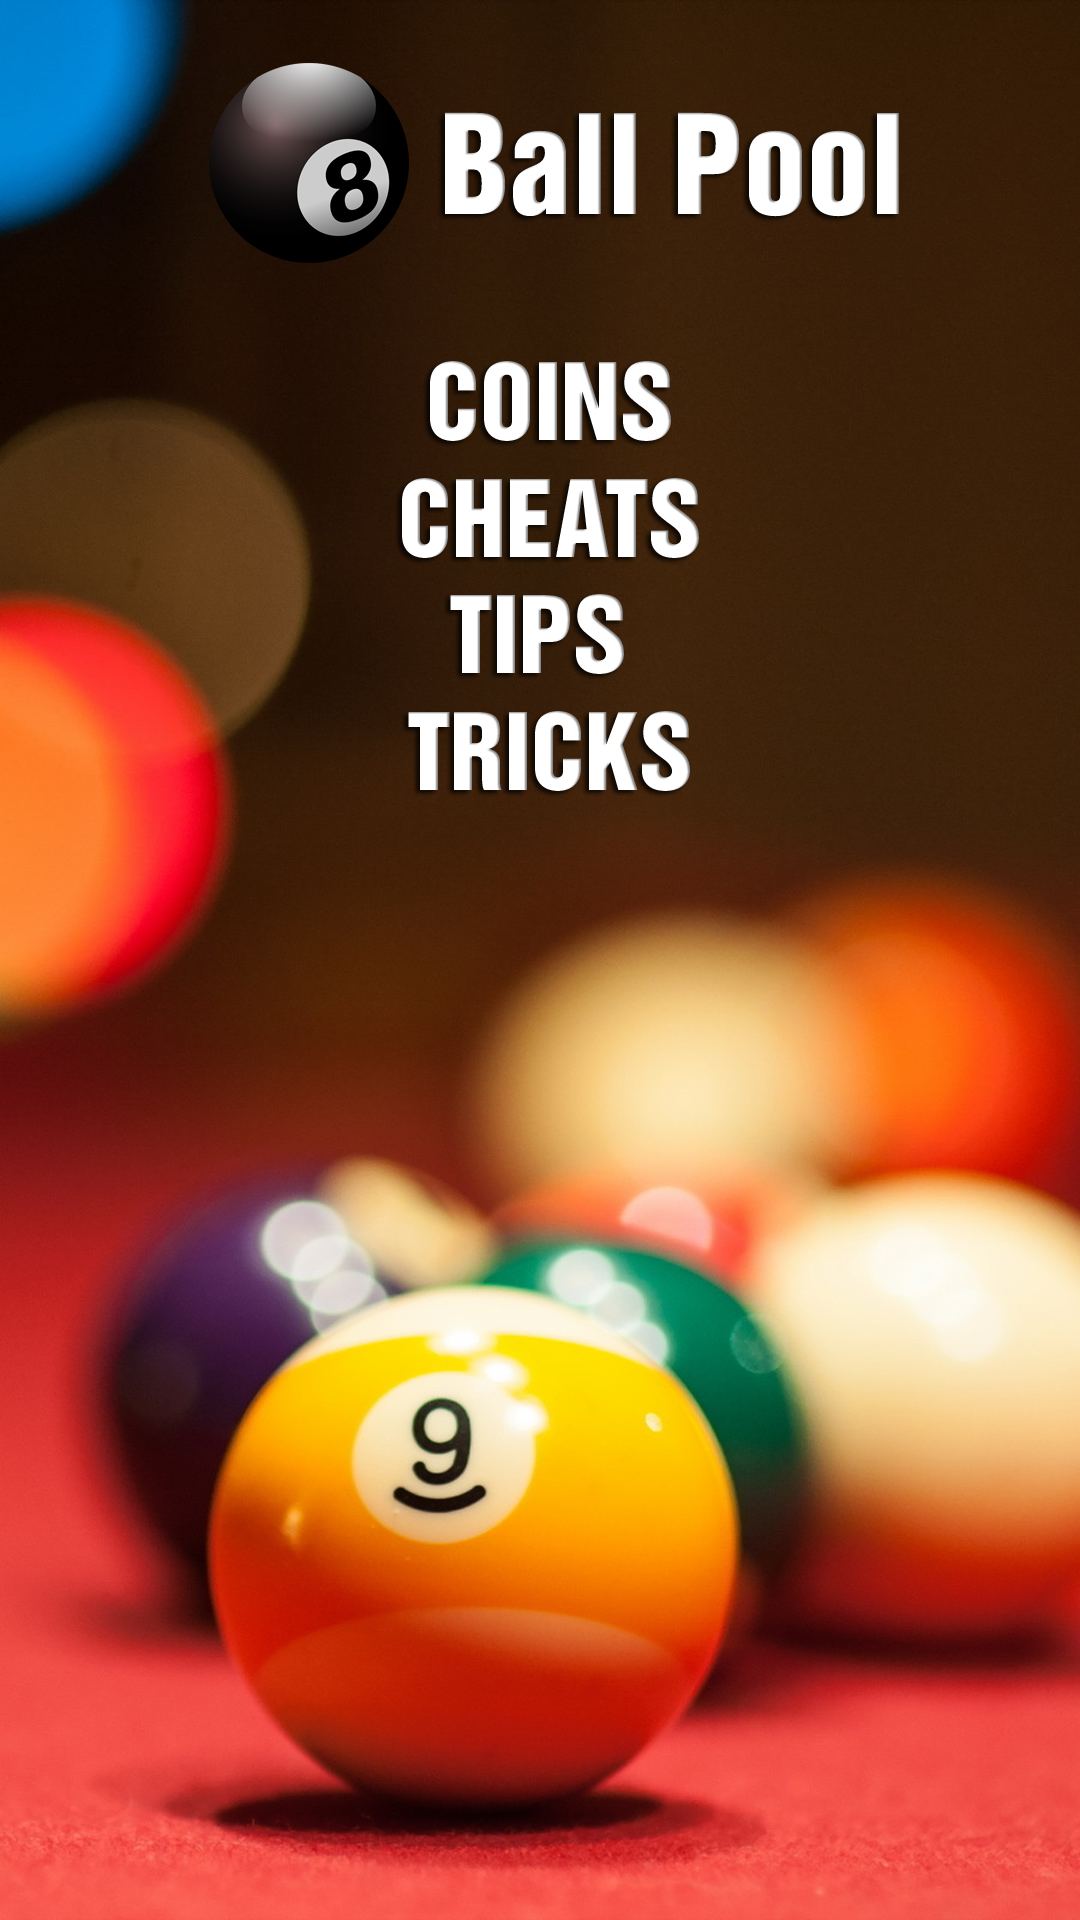 Cheats for 8 Ball Pool for Android - APK Download - 